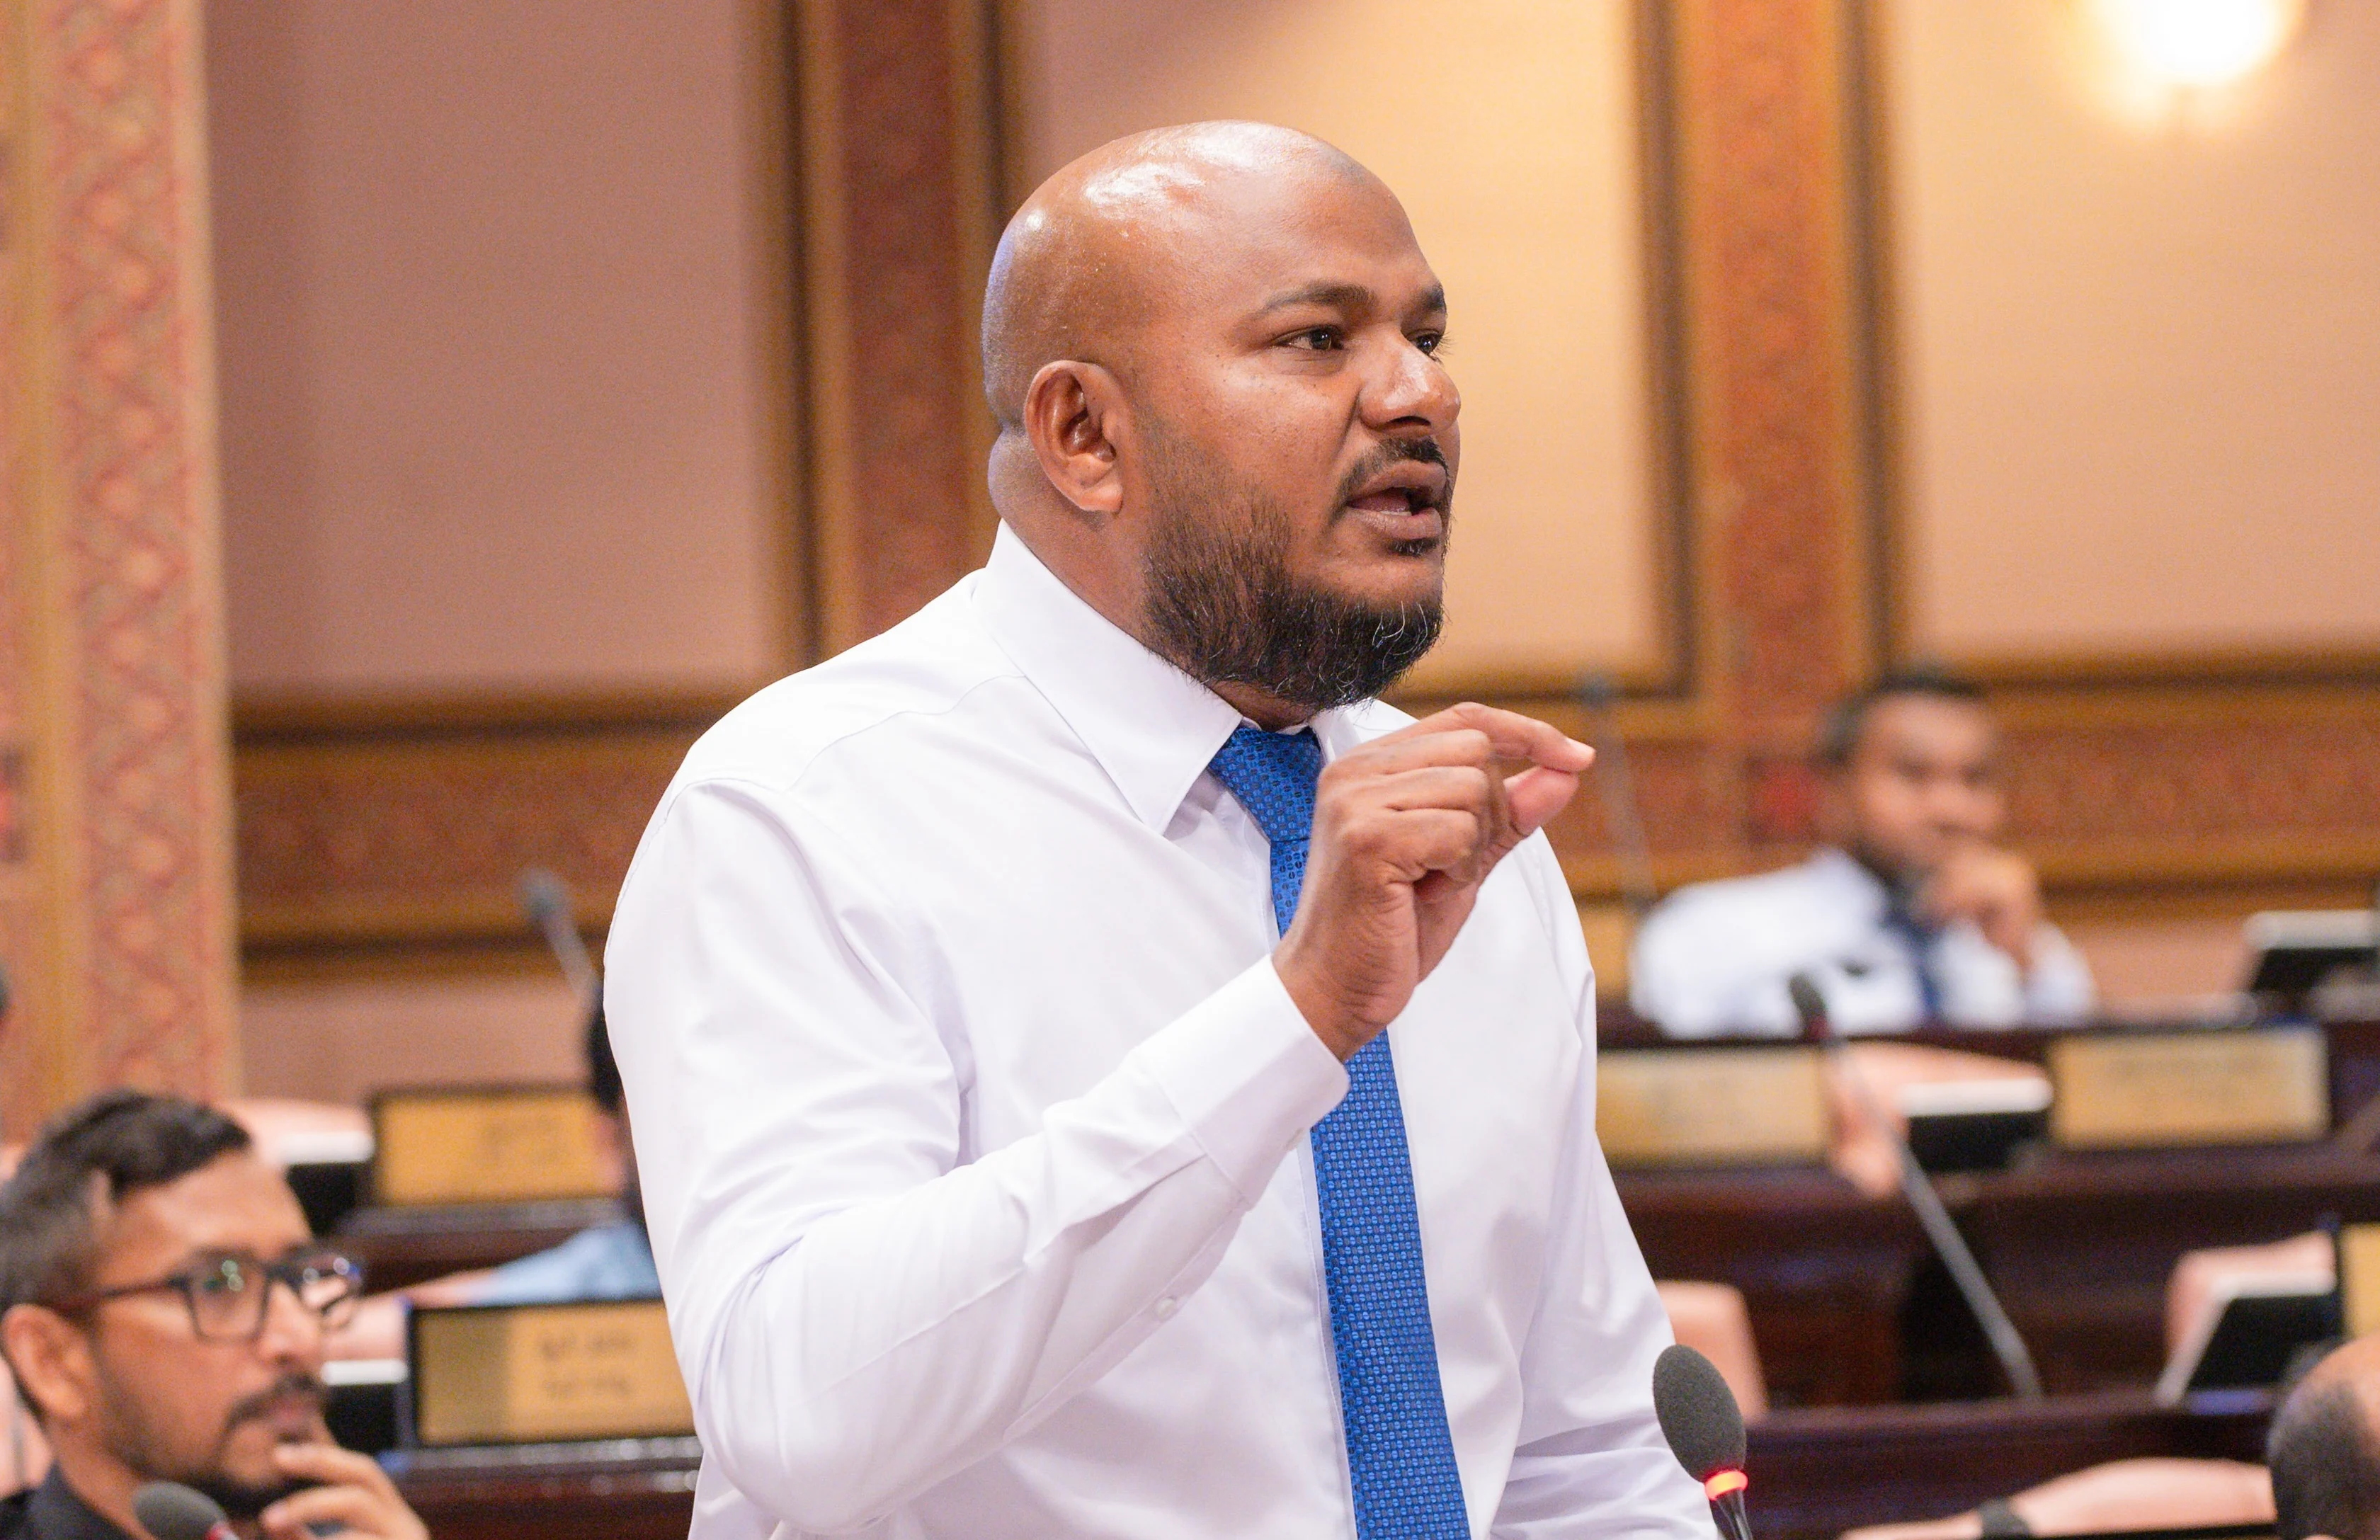 MP Shujau accuses MDP Government of misusing state funds